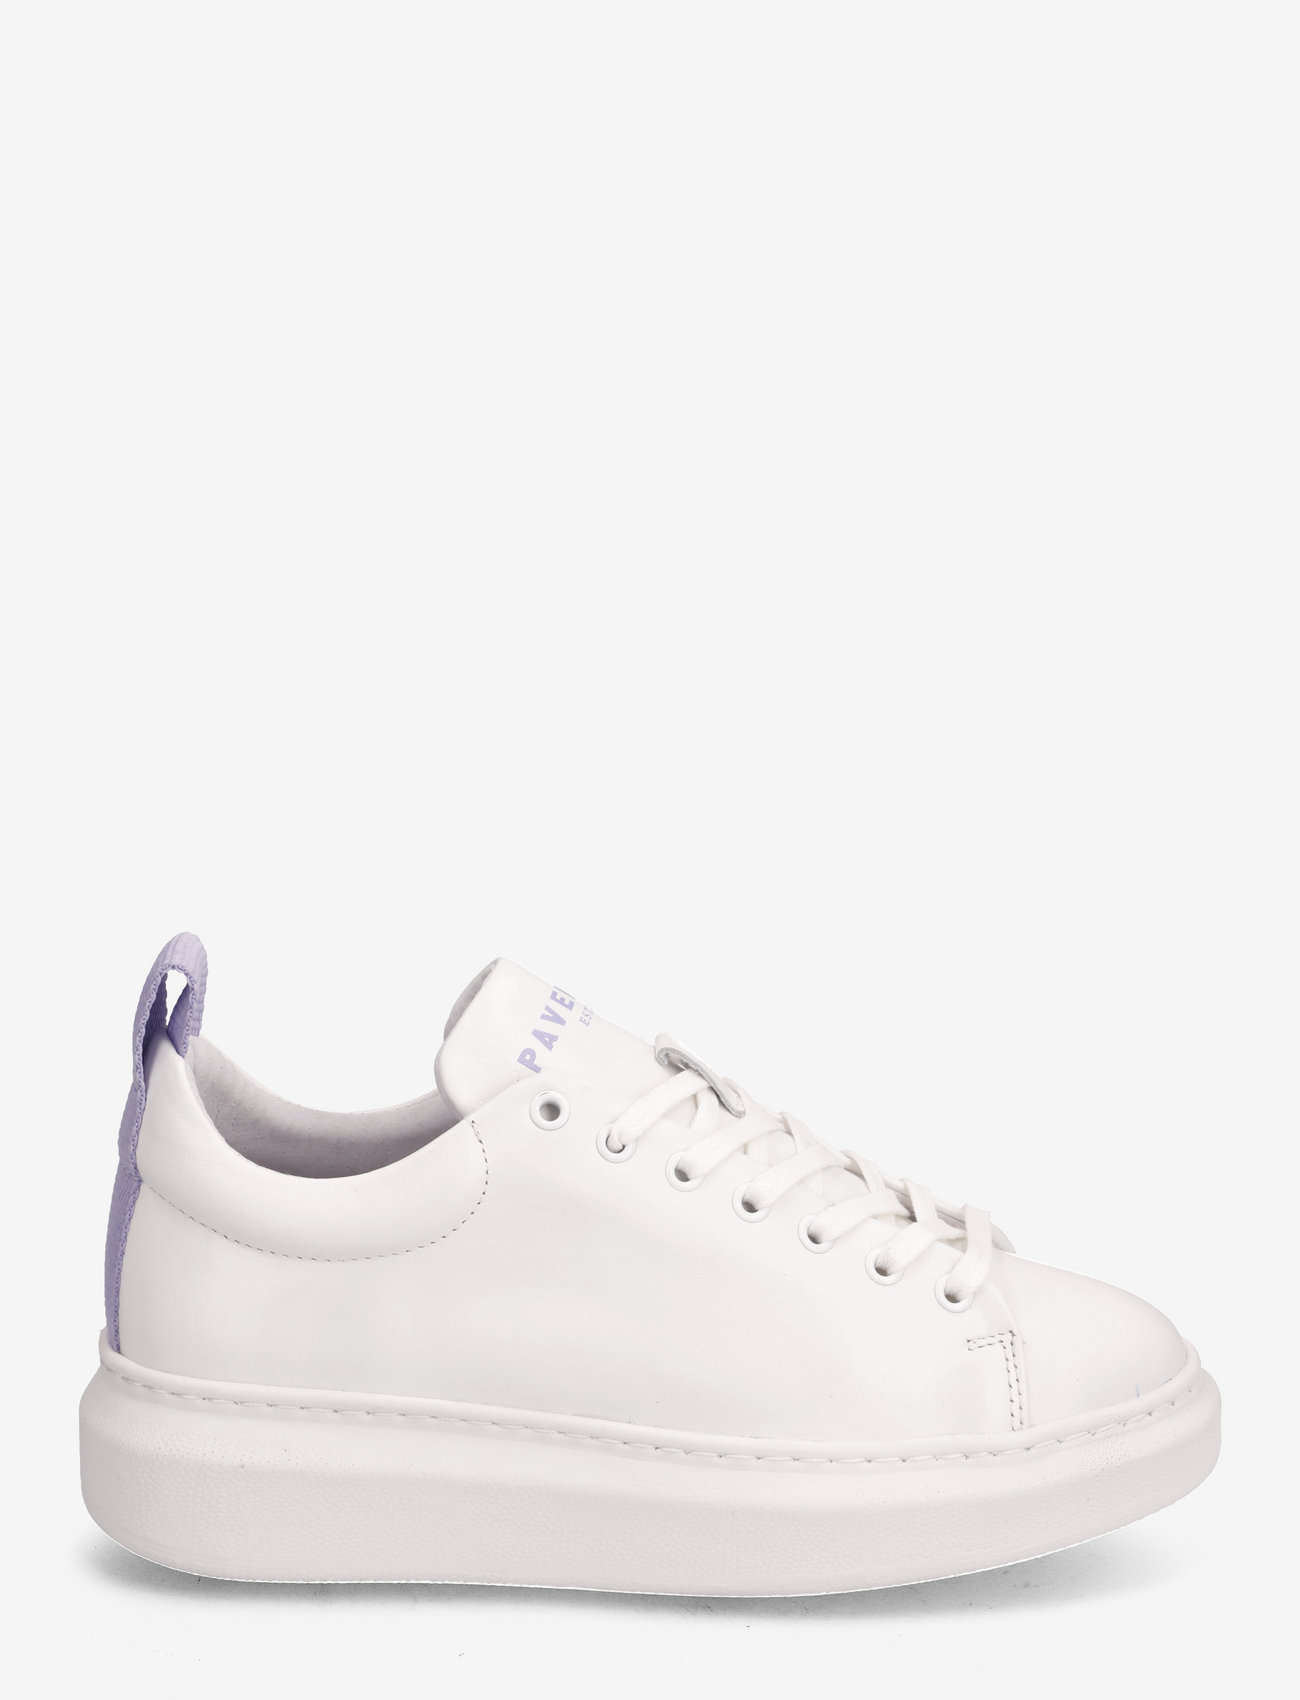 Pavement - Dee color - lage sneakers - white/purple - 1